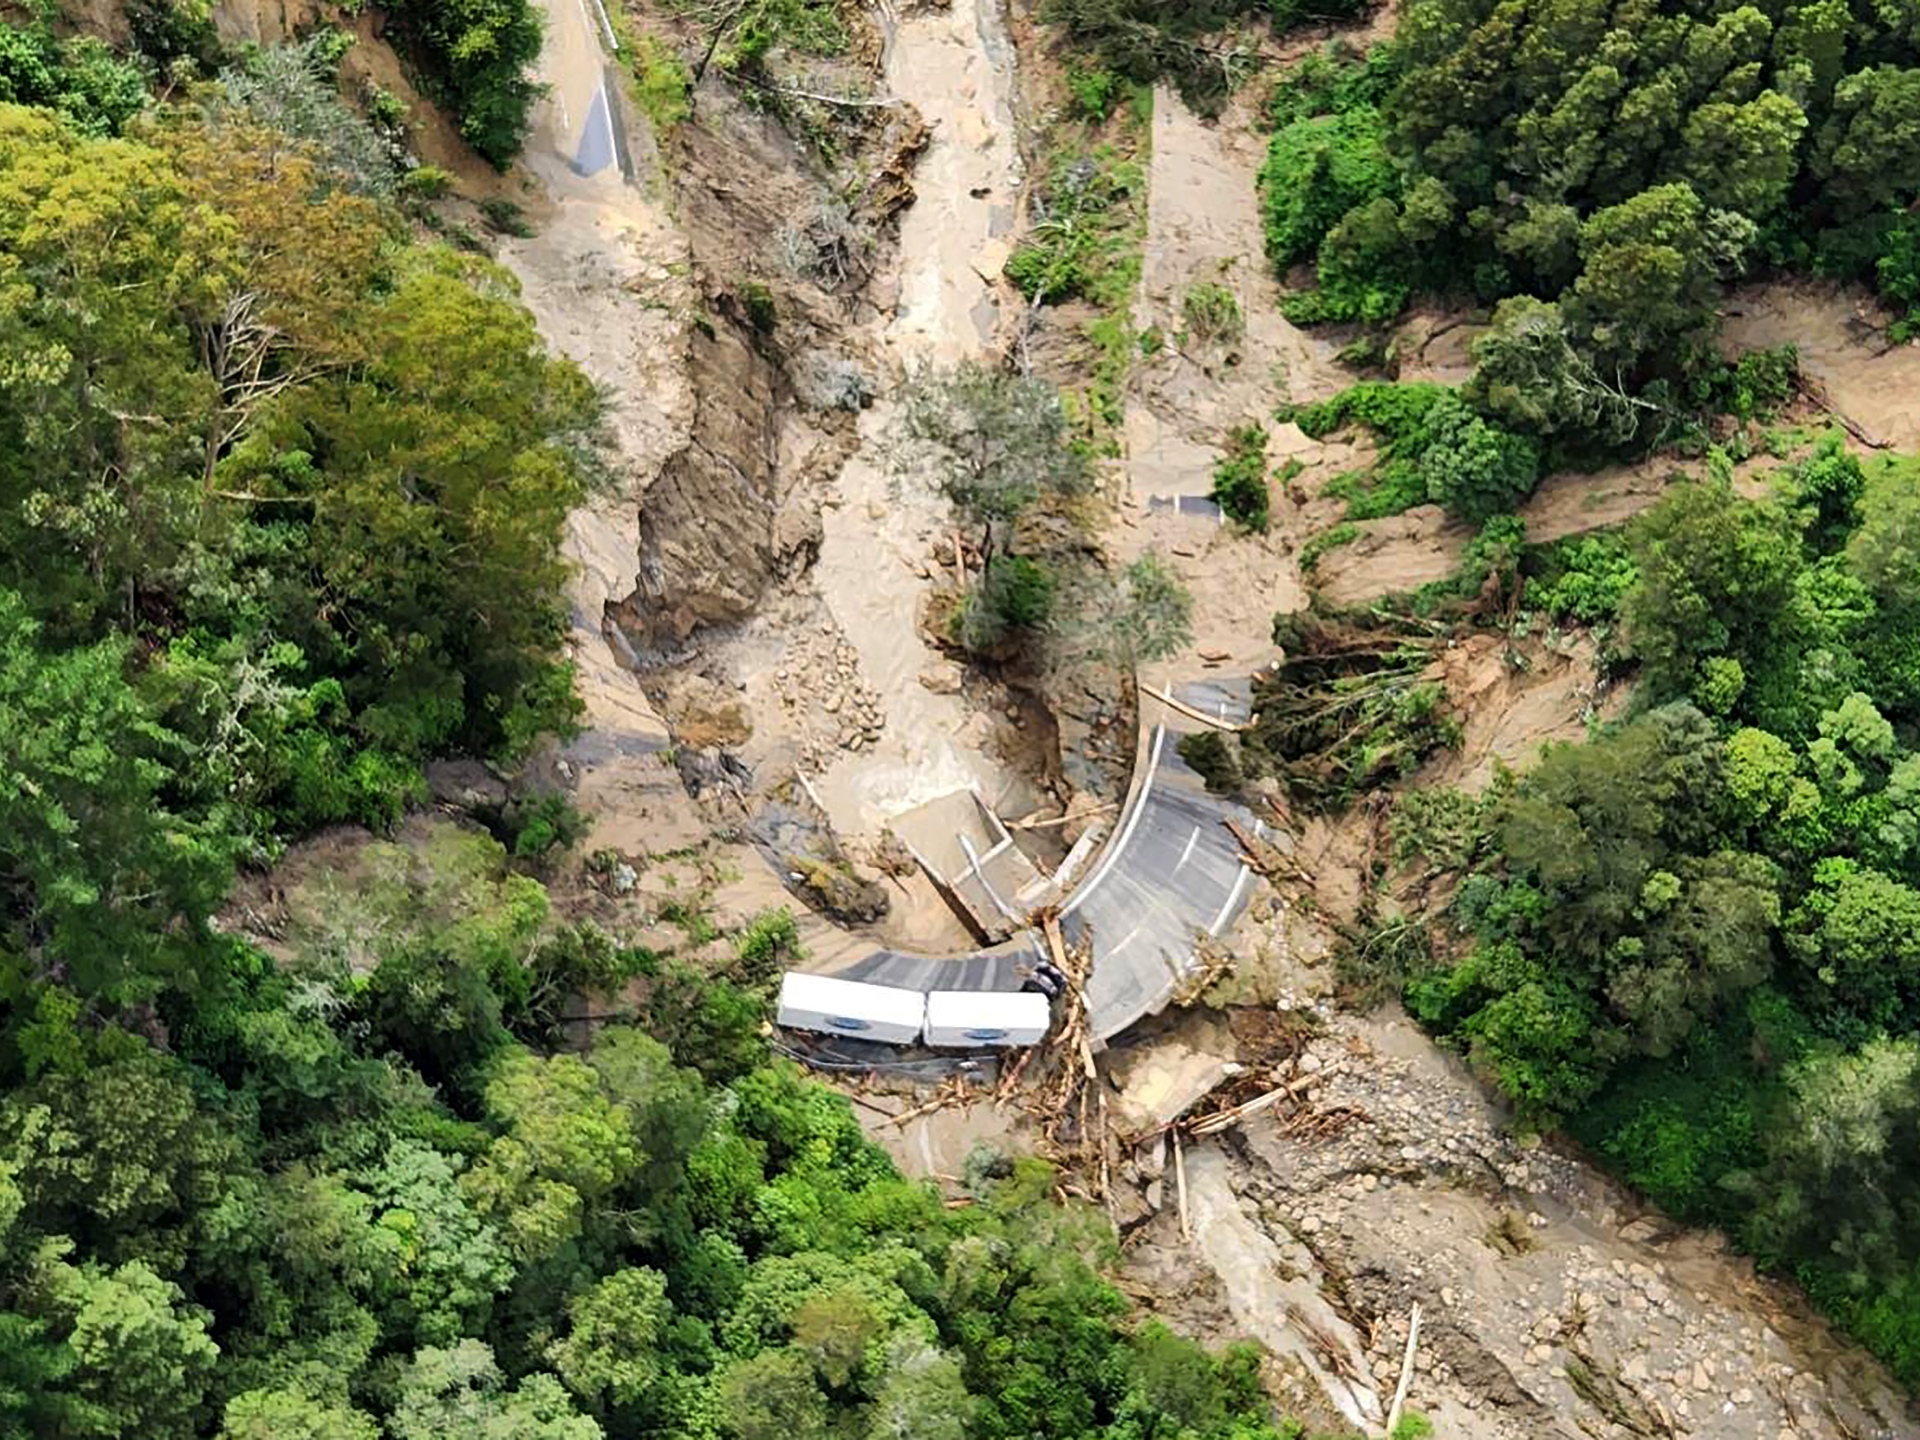 three-killed-in-new-zealand-cyclone-as-clean-up-begins